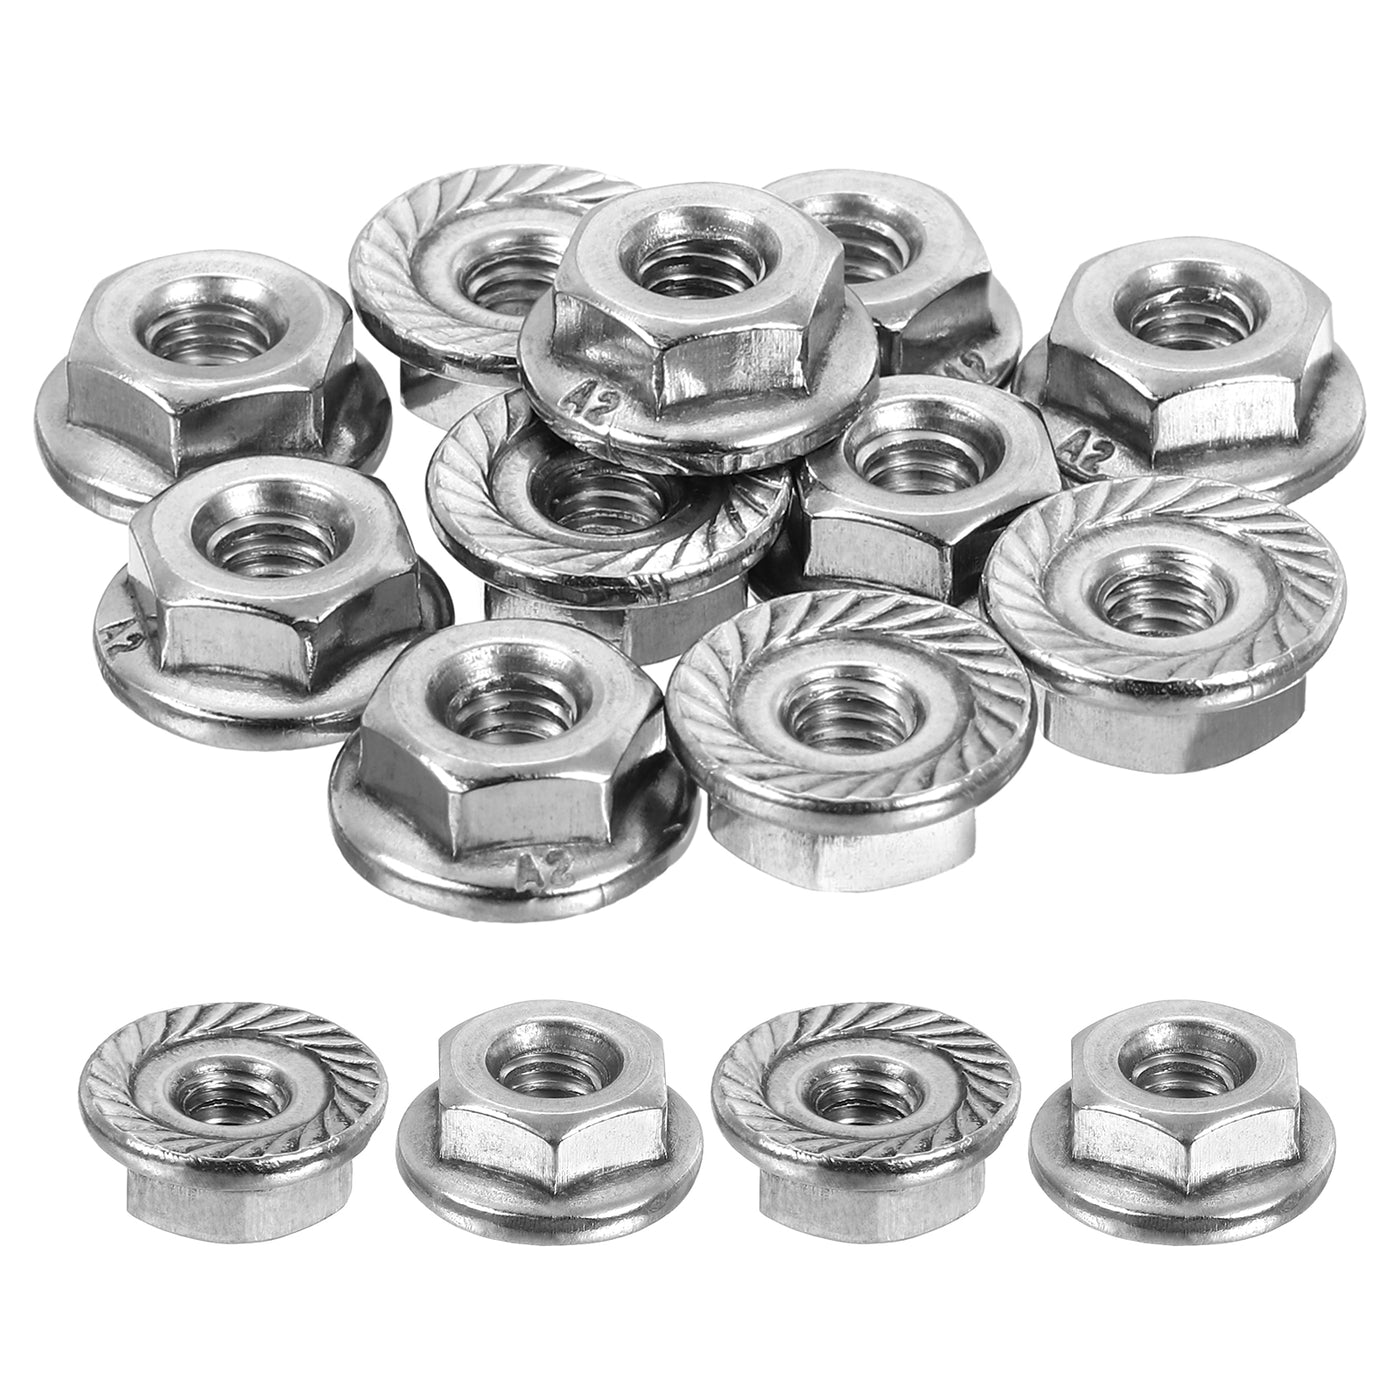 uxcell Uxcell #8-32 Serrated Flange Hex Lock Nuts, 25Pcs Hexagon Flange Nut, Silver